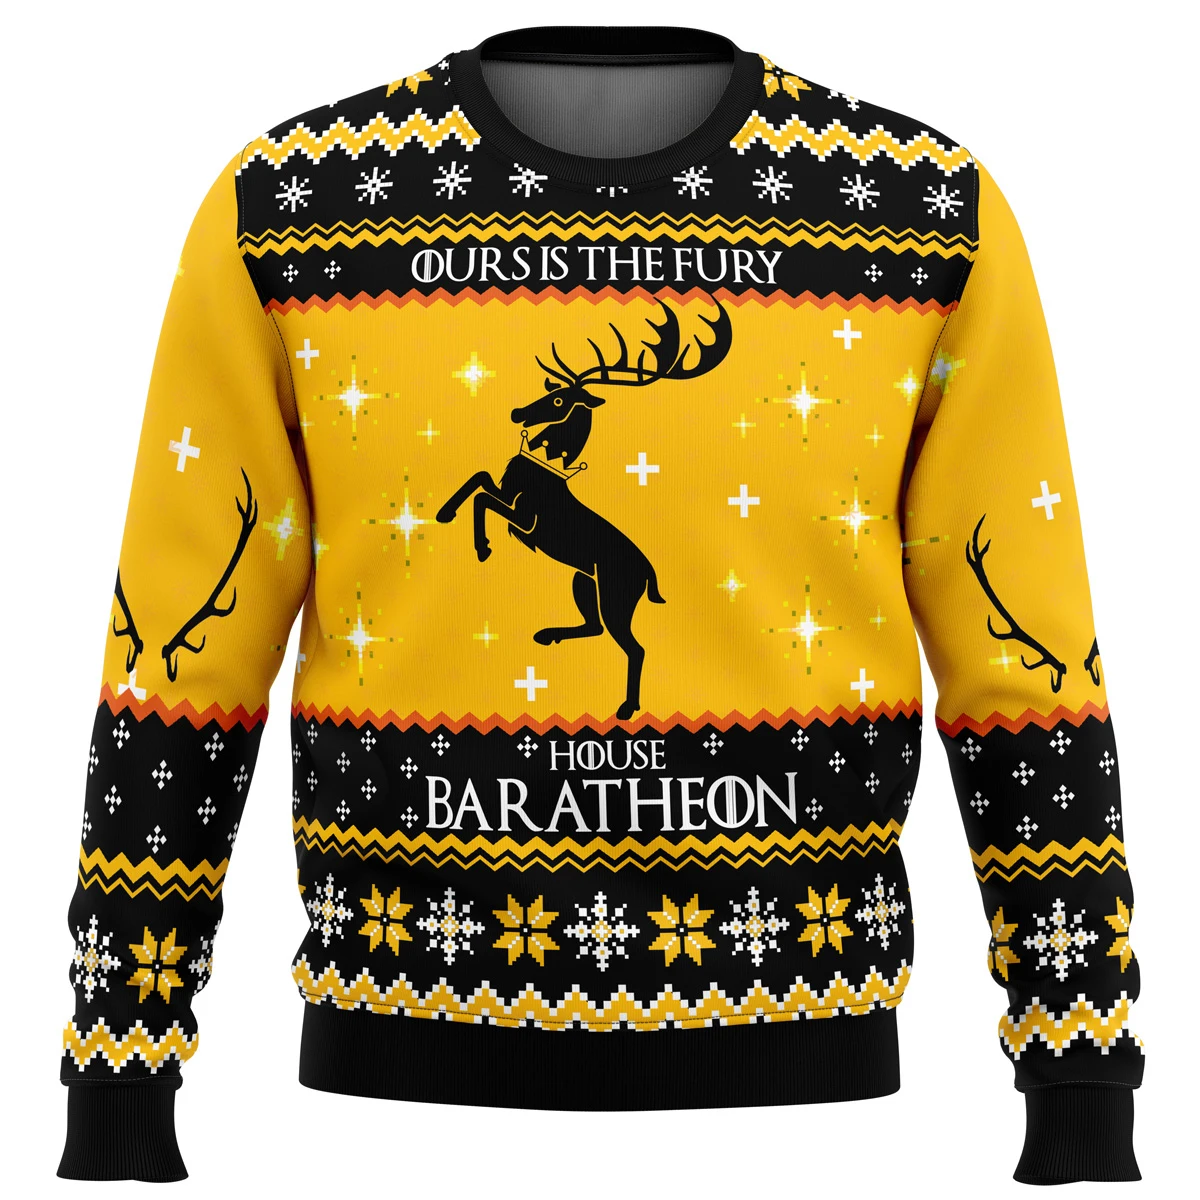 Game Of Thrones Christmas Is Coming Ugly Christmas Sweatshirt Gift Santa Claus Pullover Autumn Winter Men 2 - Game Of Thrones Shop